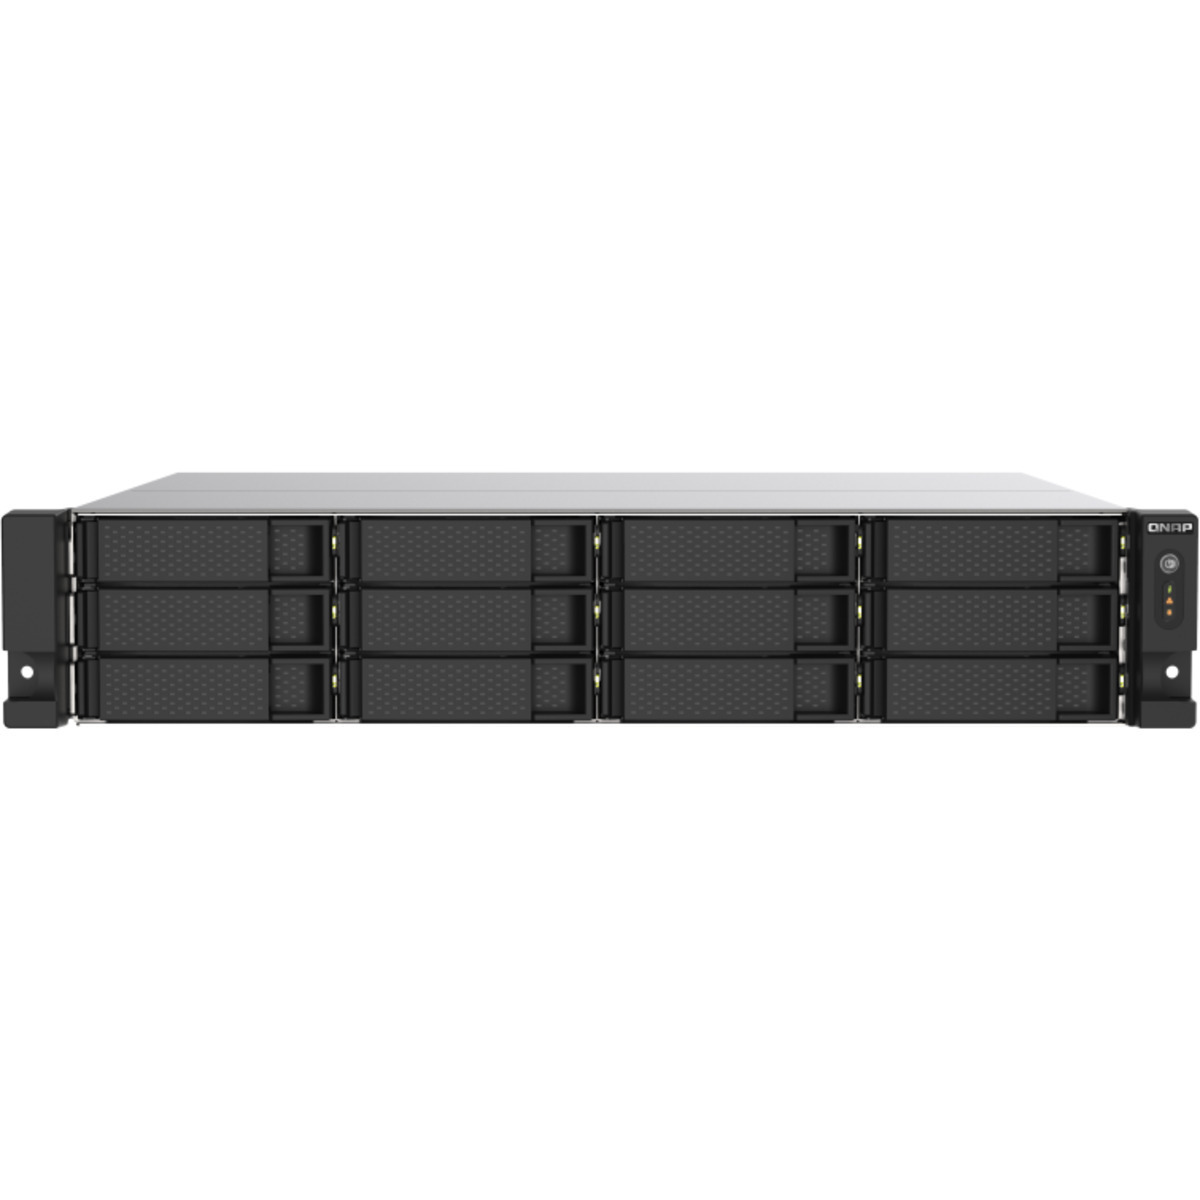 QNAP TS-1273AU-RP 64tb 12-Bay RackMount Multimedia / Power User / Business NAS - Network Attached Storage Device 8x8tb Toshiba Enterprise Capacity MG08ADA800E 3.5 7200rpm SATA 6Gb/s HDD ENTERPRISE Class Drives Installed - Burn-In Tested - FREE RAM UPGRADE TS-1273AU-RP